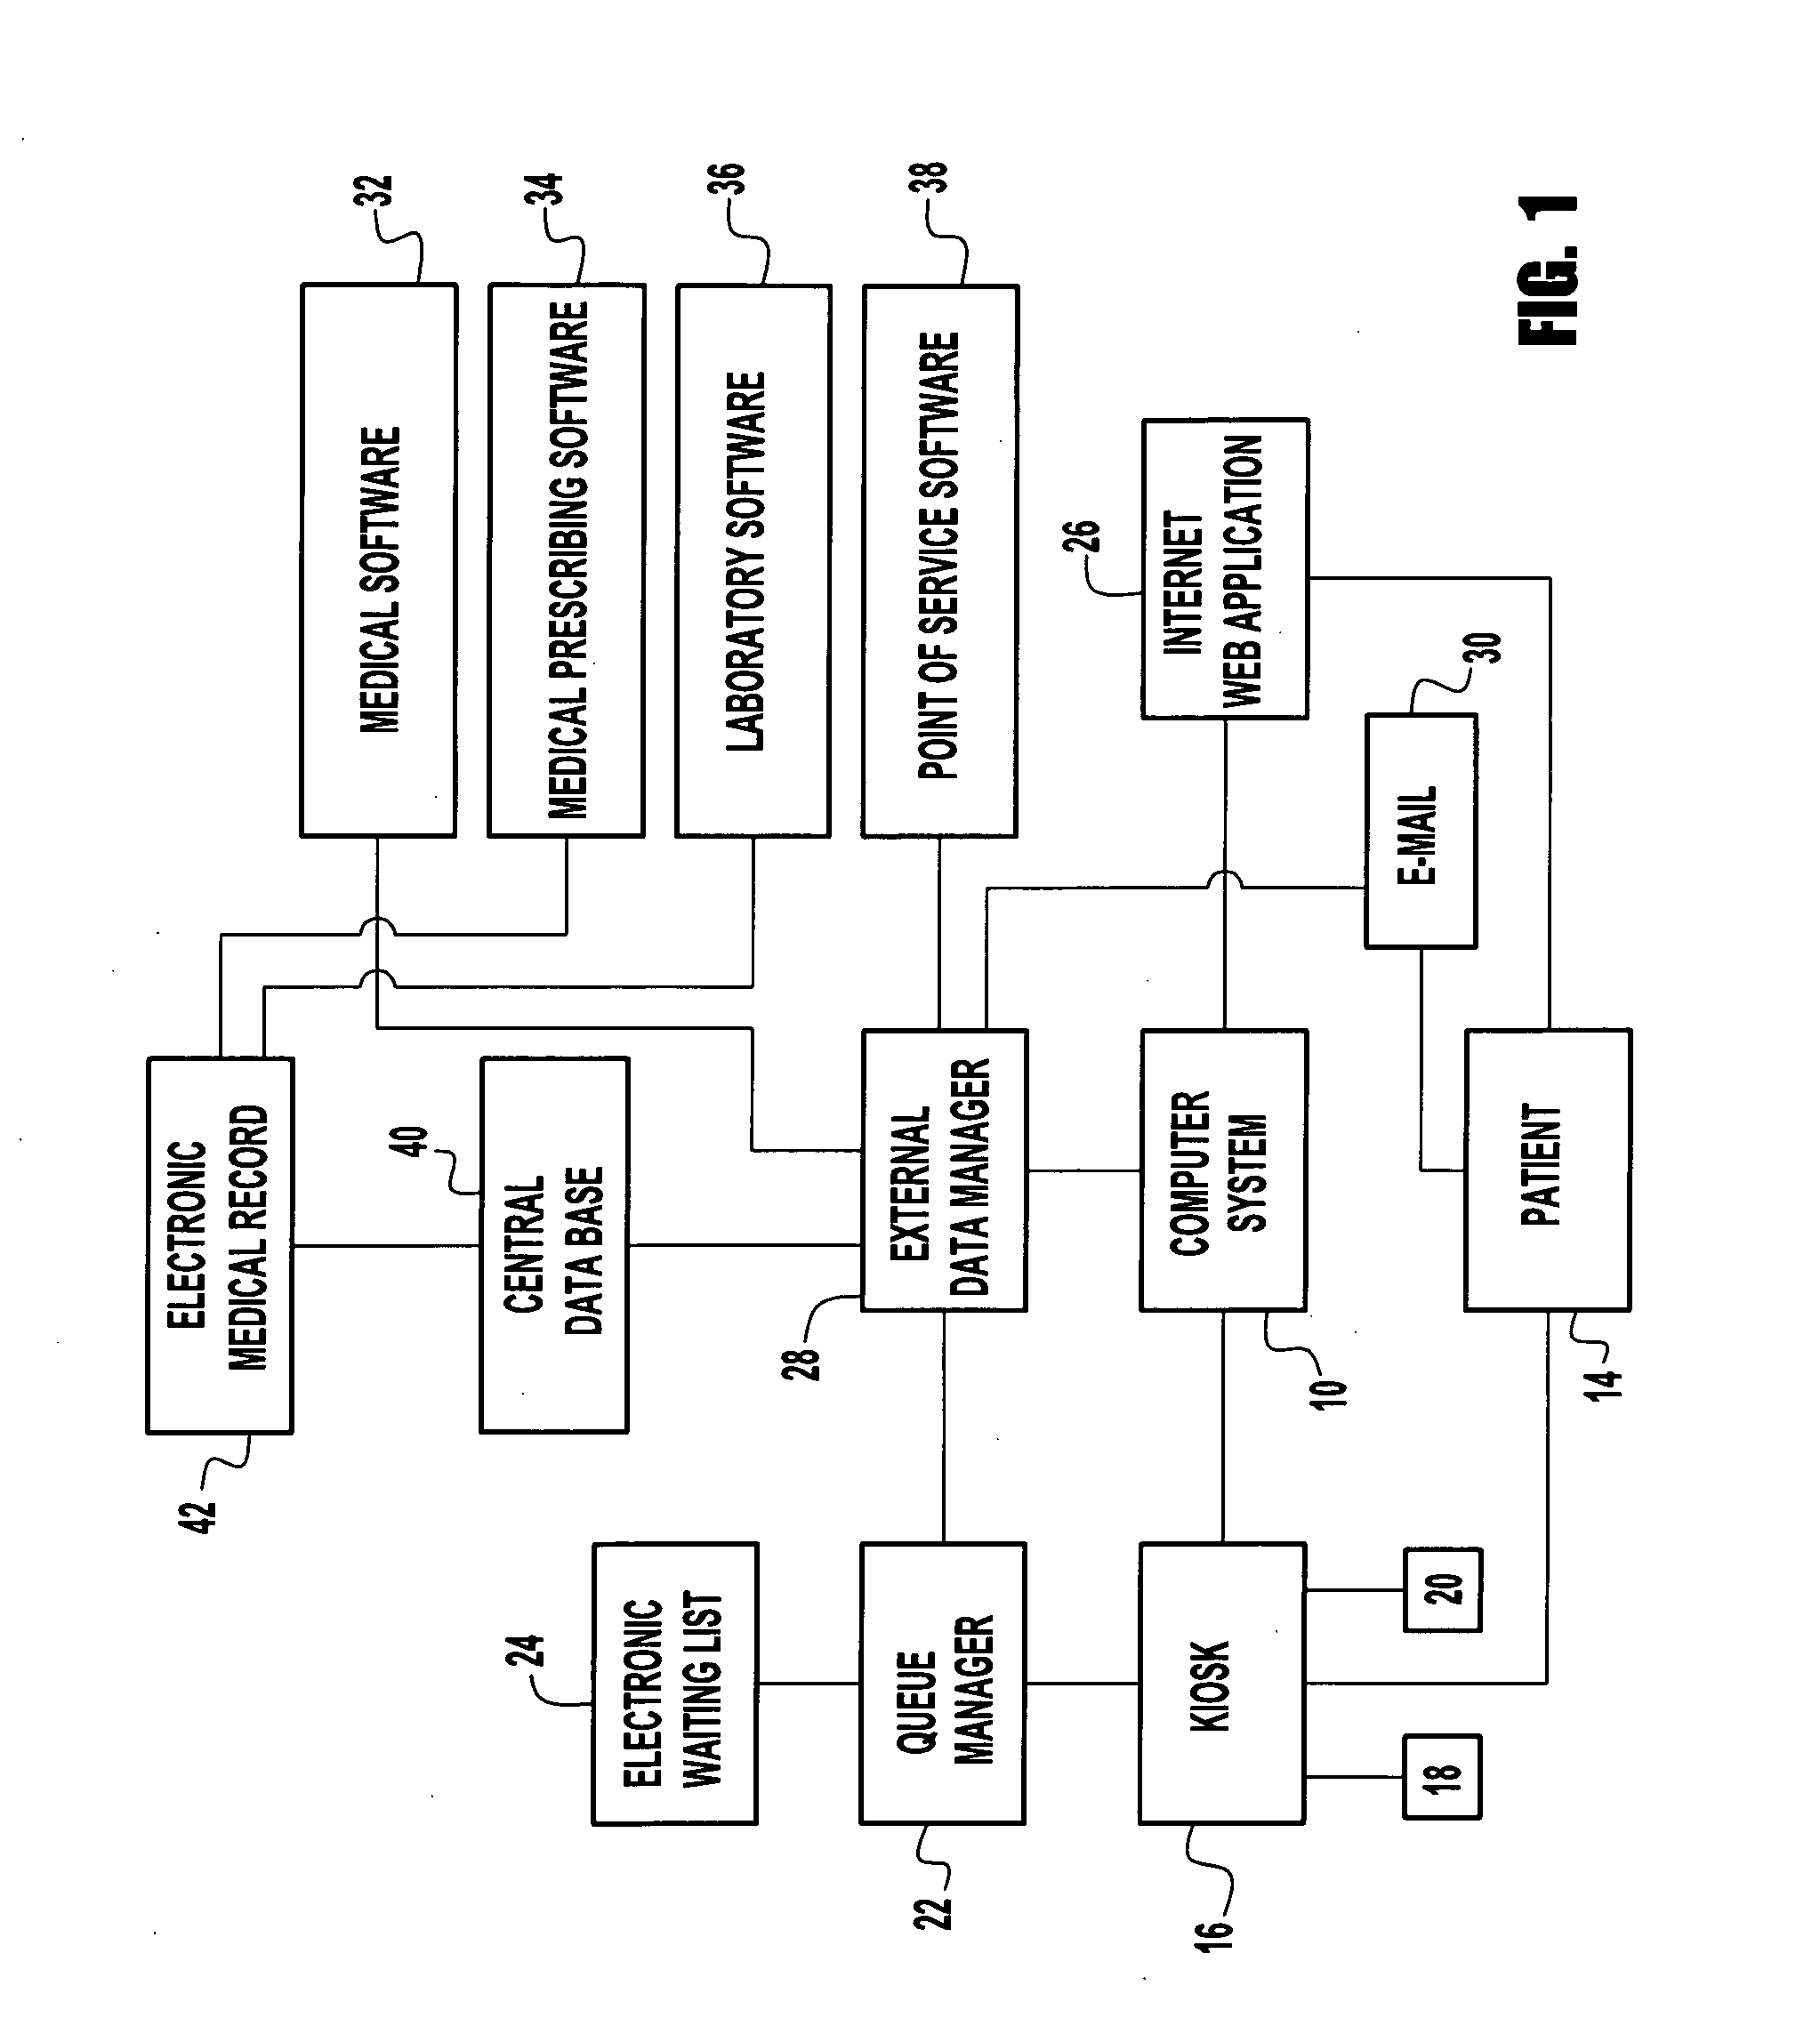 Medical data storage method and system